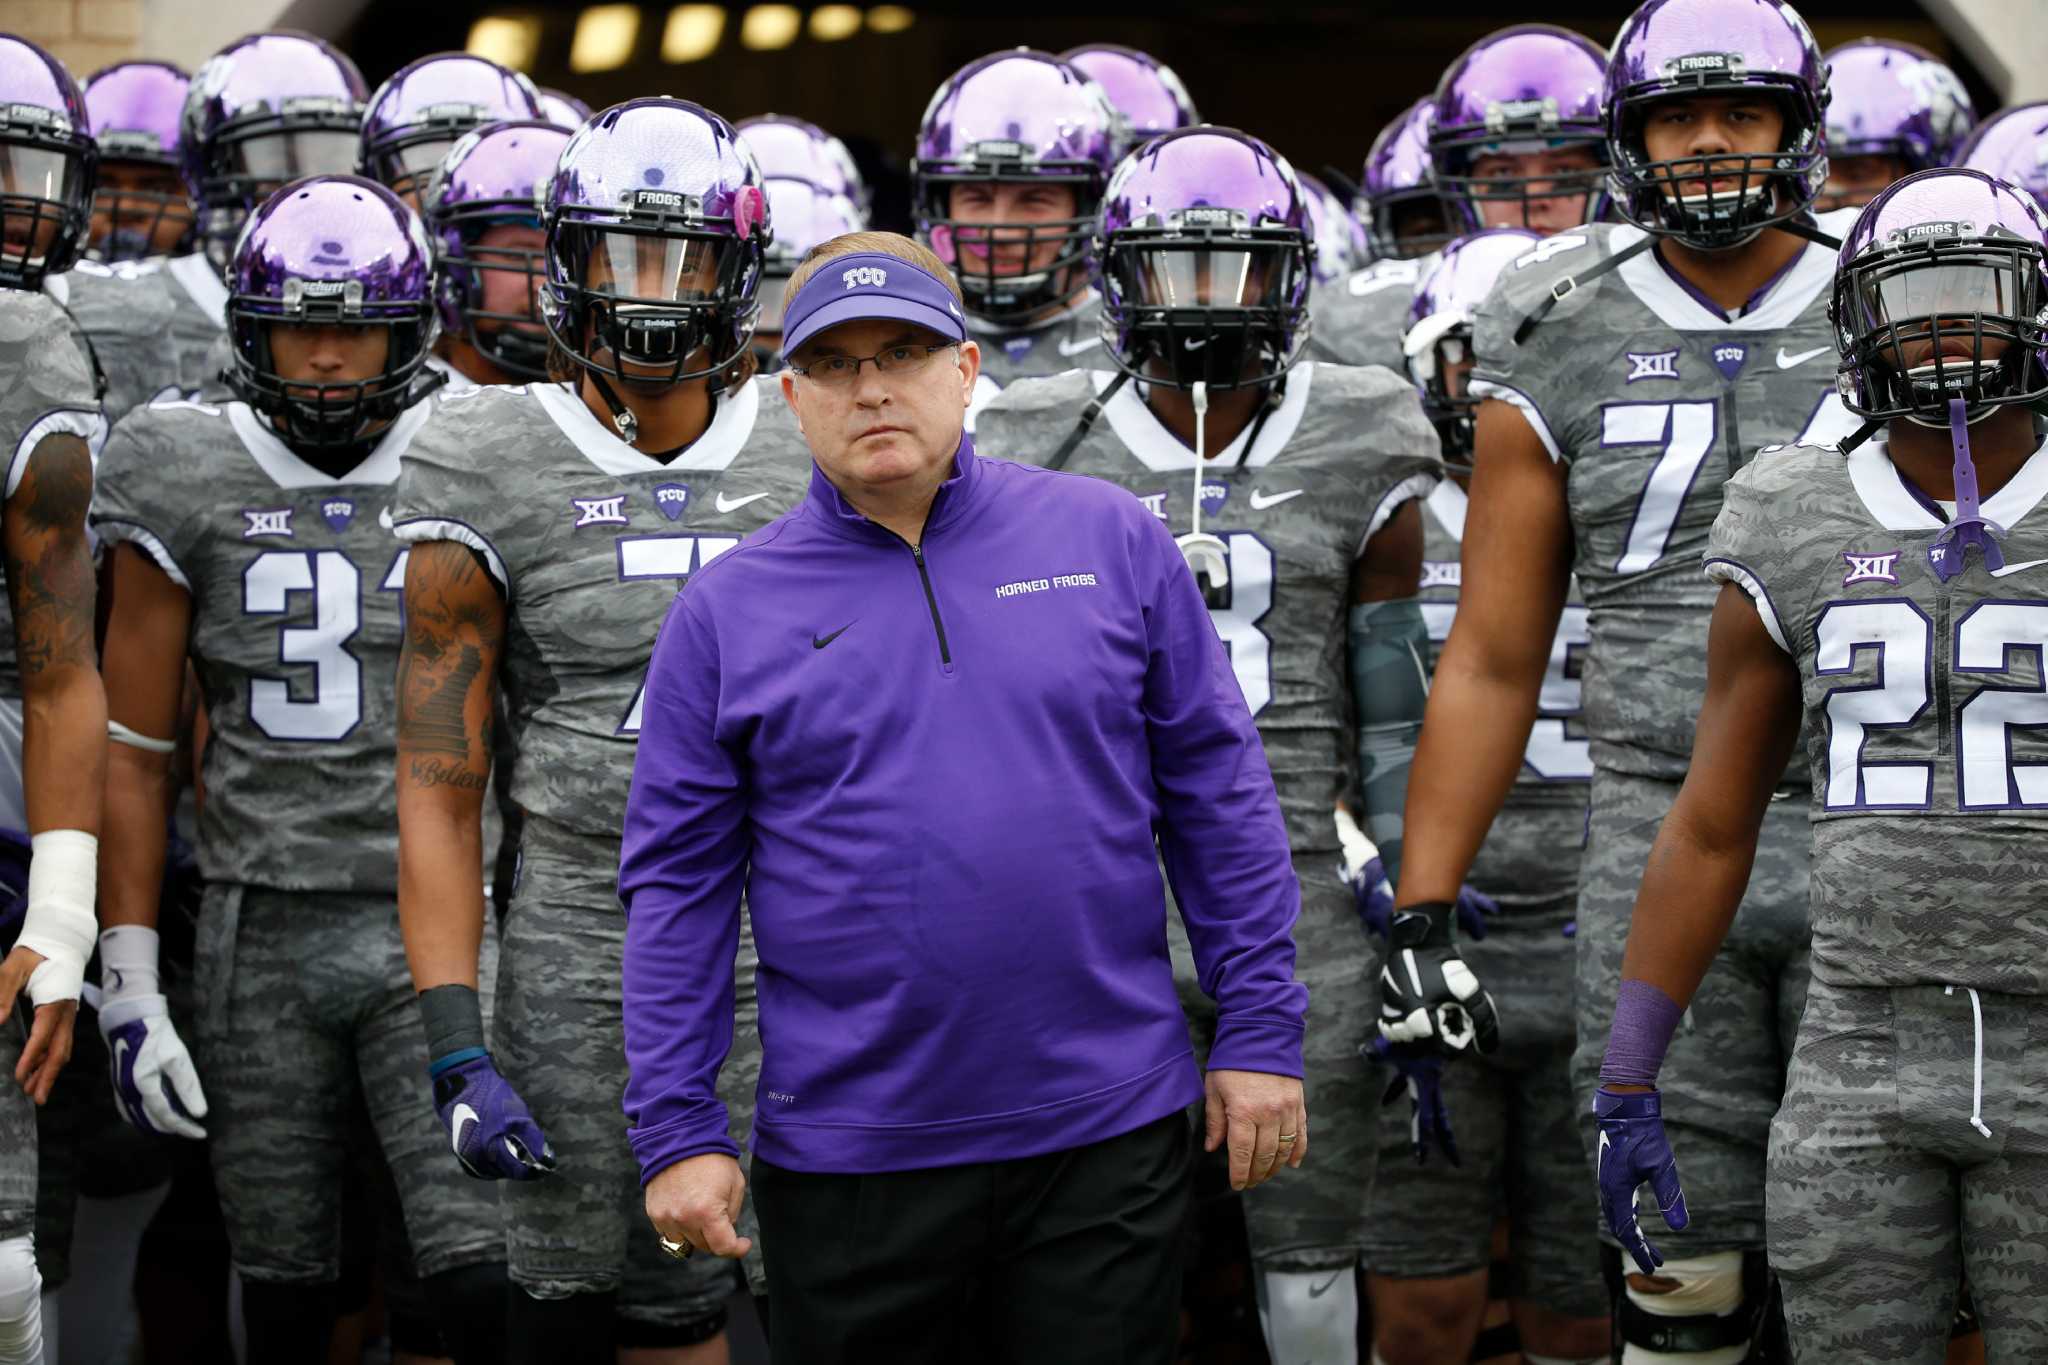 Patterson's determined touch has built TCU into national power